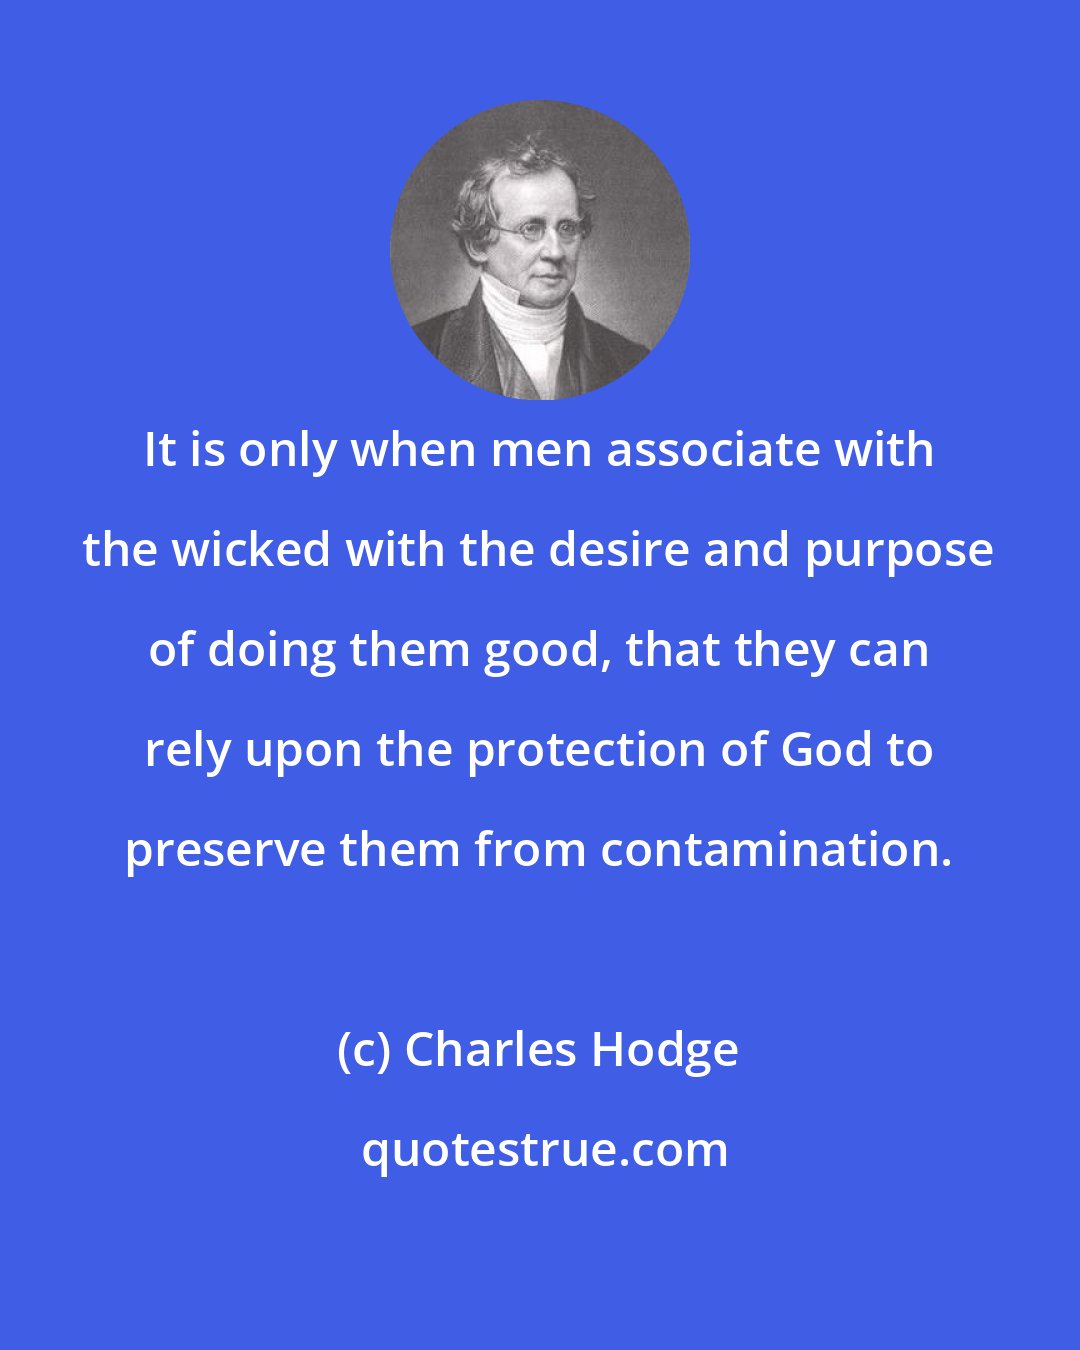 Charles Hodge: It is only when men associate with the wicked with the desire and purpose of doing them good, that they can rely upon the protection of God to preserve them from contamination.